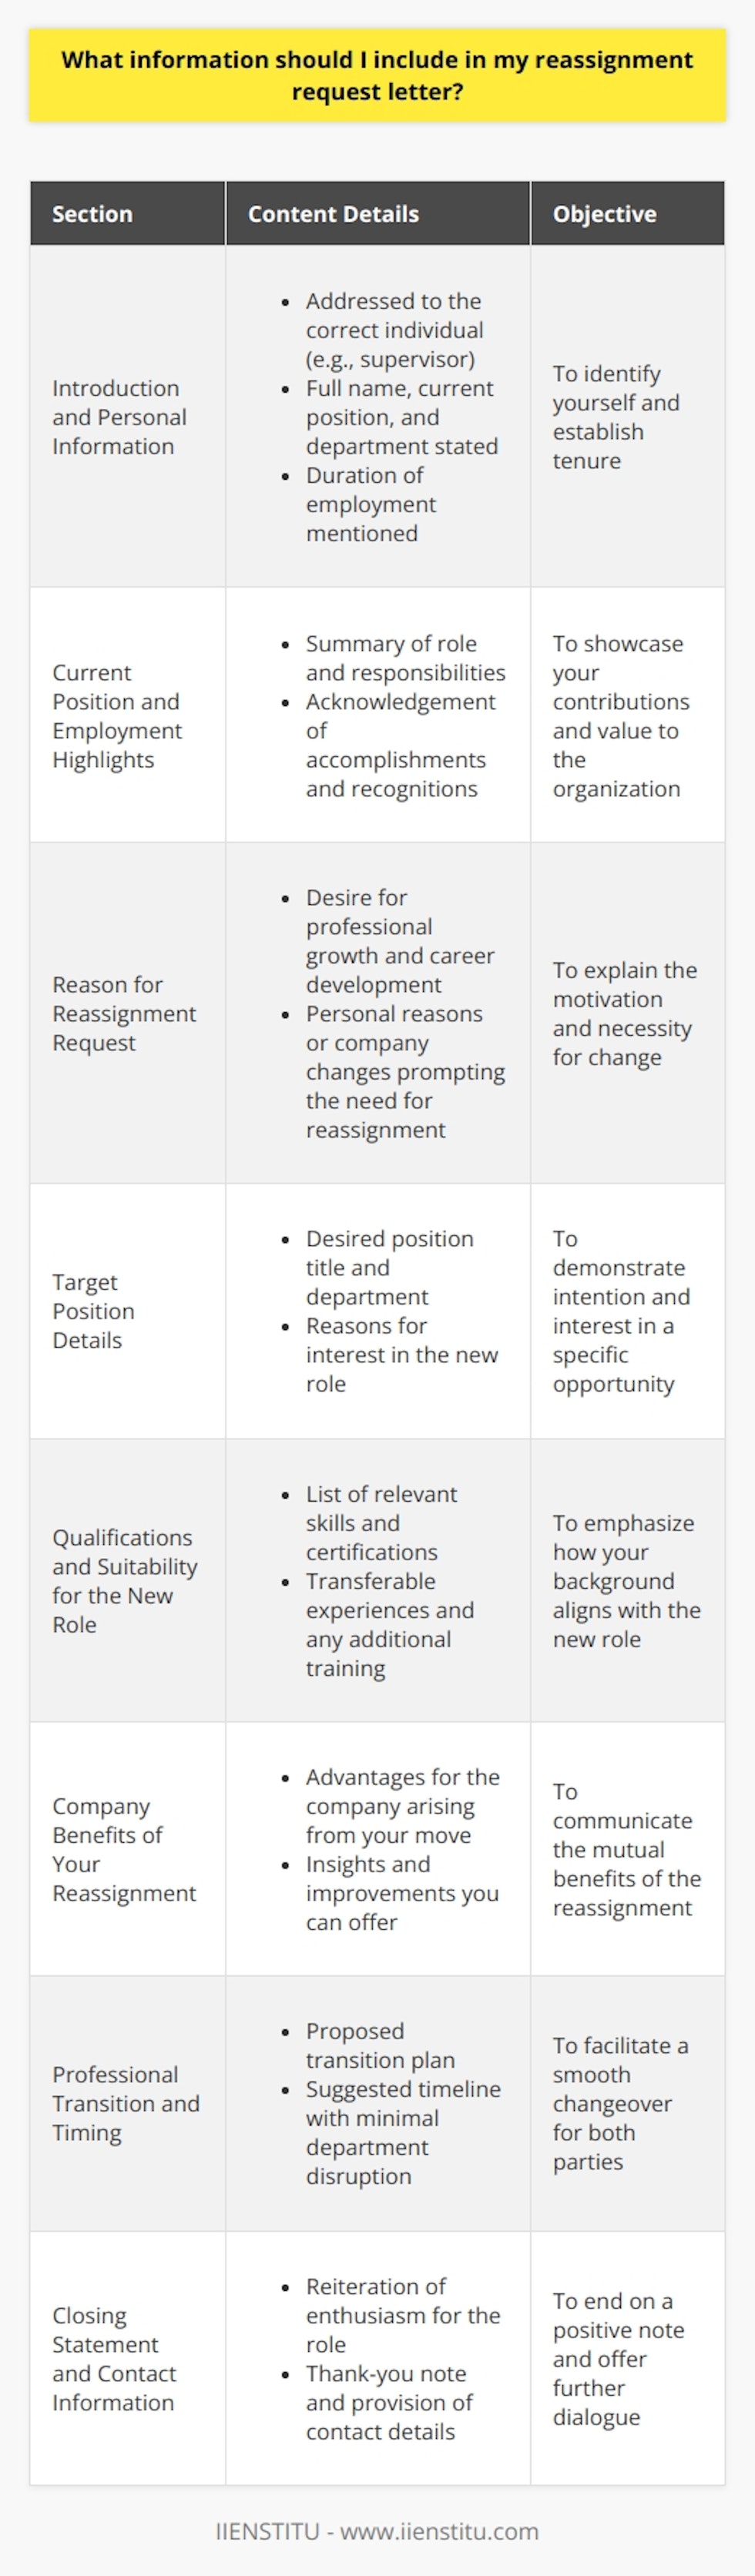 When composing a reassignment request letter, your aim is to persuade your employer that moving you to a different position is beneficial for both you and the organization. Below, we outline the key information that should be included in an effective reassignment request letter:1. **Introduction and Personal Information:**   - Start by addressing the letter to the appropriate supervisor, human resources manager, or department head.   - State your full name, current job title, and department within the organization.   - Mention the length of time you have been employed with the company.2. **Current Position and Employment Highlights:**   - Summarize your current role and key responsibilities.   - Reflect on any accomplishments or contributions you’ve made in your current position that demonstrate your value to the company.   - If relevant, discuss any recognition or awards you have received during your tenure.3. **Reason for Reassignment Request:**   - Clearly articulate the reasons for your request for reassignment. These may include:     - Professional growth and career development opportunities.     - Desire to leverage your skills and experiences in a new capacity.     - Personal circumstances that necessitate a change in role or department.     - Company restructuring or changes in business direction that affect your current position.4. **Target Position Details:**   - Specify the job title and department of the position you’re seeking reassignment to.   - If there is a specific job opening, mention how you became aware of it.   - Summarize the key duties and responsibilities of the position, indicating why you are interested in it.5. **Qualifications and Suitability for the New Role:**   - Highlight any specialized skills, certifications, or educational qualifications that align with the new position.   - Emphasize transferable skills and experiences from your current role that will be beneficial in the new role.   - Discuss any additional training, courses, or professional development activities you’ve undertaken that prepare you for this transition.6. **Company Benefits of Your Reassignment:**   - Explain how reassigning you to the new position could be advantageous for the company.   - Discuss any insights or perspectives you can bring to the position to improve processes, generate revenue, or enhance team dynamics.7. **Professional Transition and Timing:**   - If applicable, propose a detailed plan for your transition to the new role.   - Suggest a timeline for the reassignment that minimizes disruption to your current department.8. **Closing Statement and Contact Information:**   - Reiterate your enthusiasm for the new role and your commitment to the company.   - Thank the recipient for considering your request.   - Provide your contact information, including your phone number and email address, for follow-up.Express your willingness to discuss the reassignment request in further detail in a face-to-face meeting. Keep the tone professional, respectful, and positive throughout your letter, ensuring it reflects a collaborative approach to your career development and the organization's success.It is also essential to research the specifics of the target position and department, ensuring your reassignment request letter is tailored to the needs and culture of that area within the organization. For assistance in crafting effective professional documents such as reassignment request letters, consider seeking resources and courses on professional writing offered by IIENSTITU, a company committed to providing valuable educational content and training.